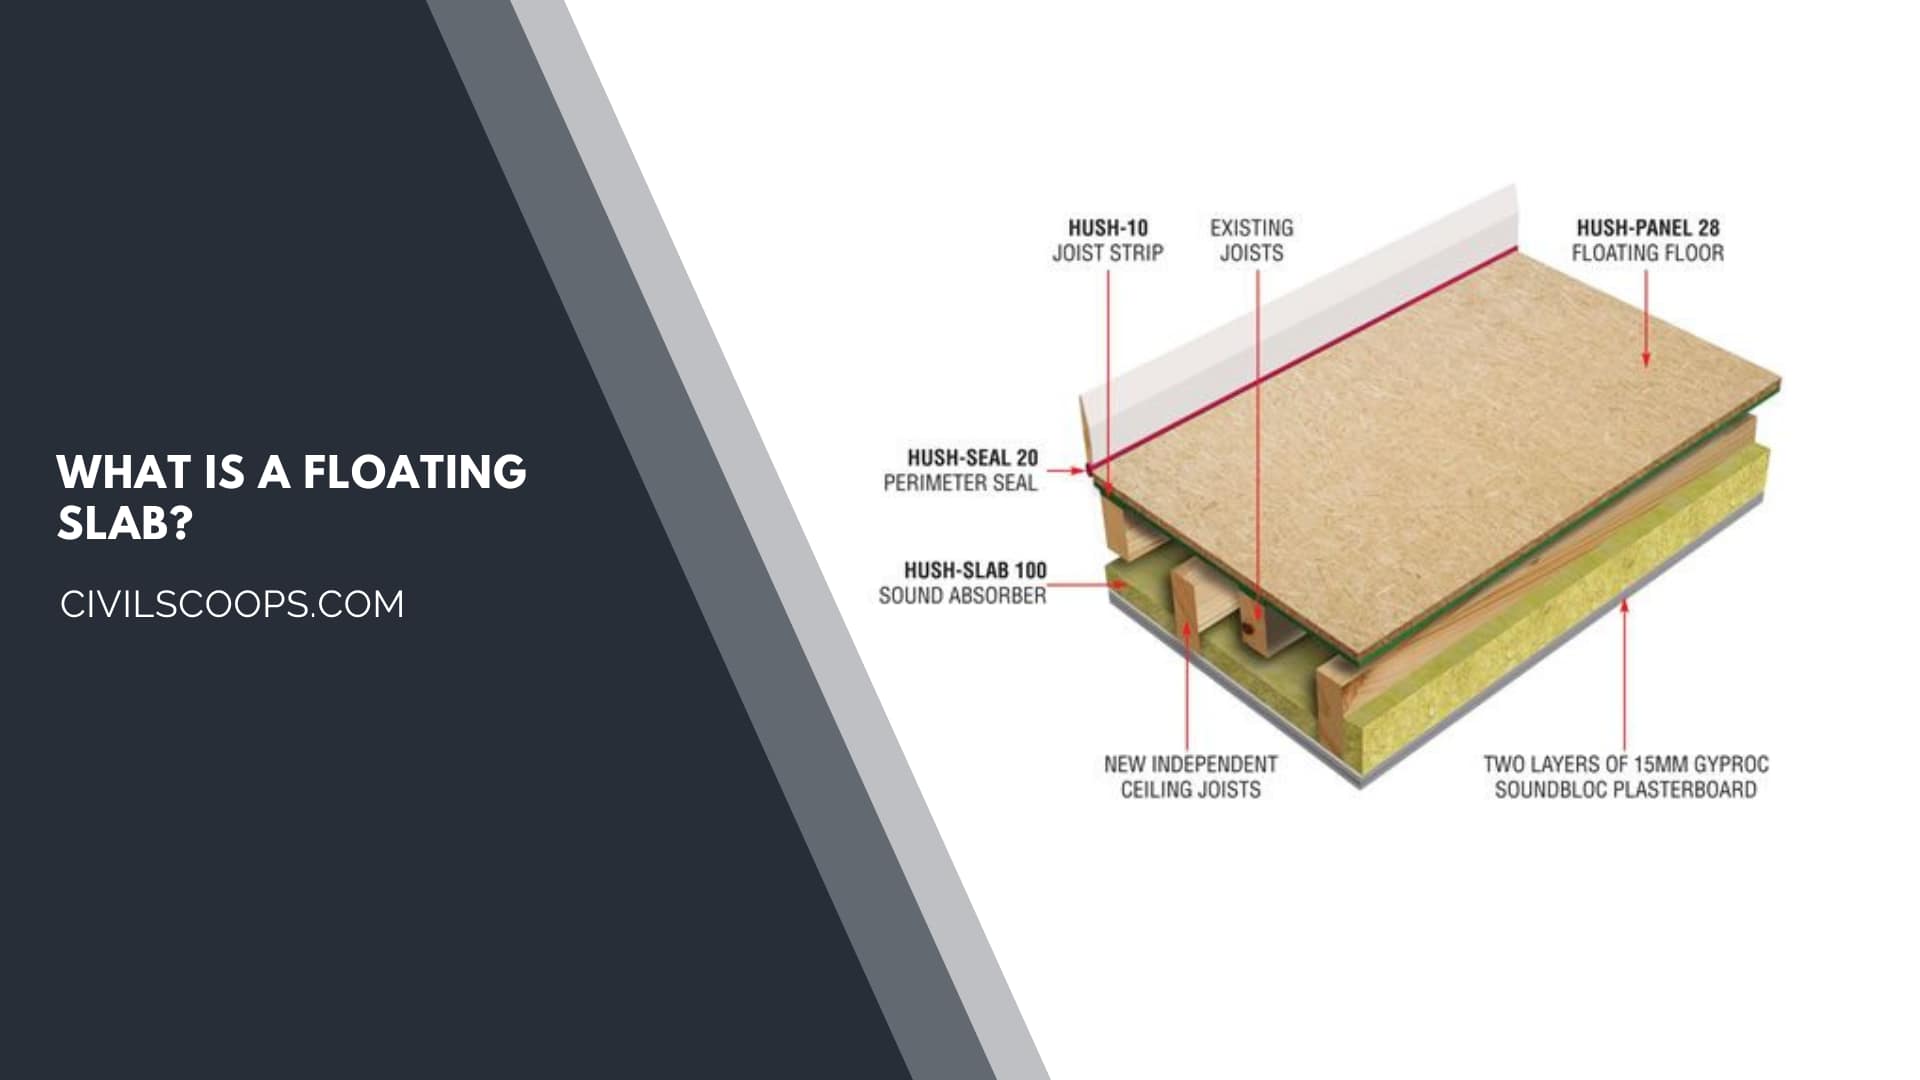 What Is a Floating Slab?